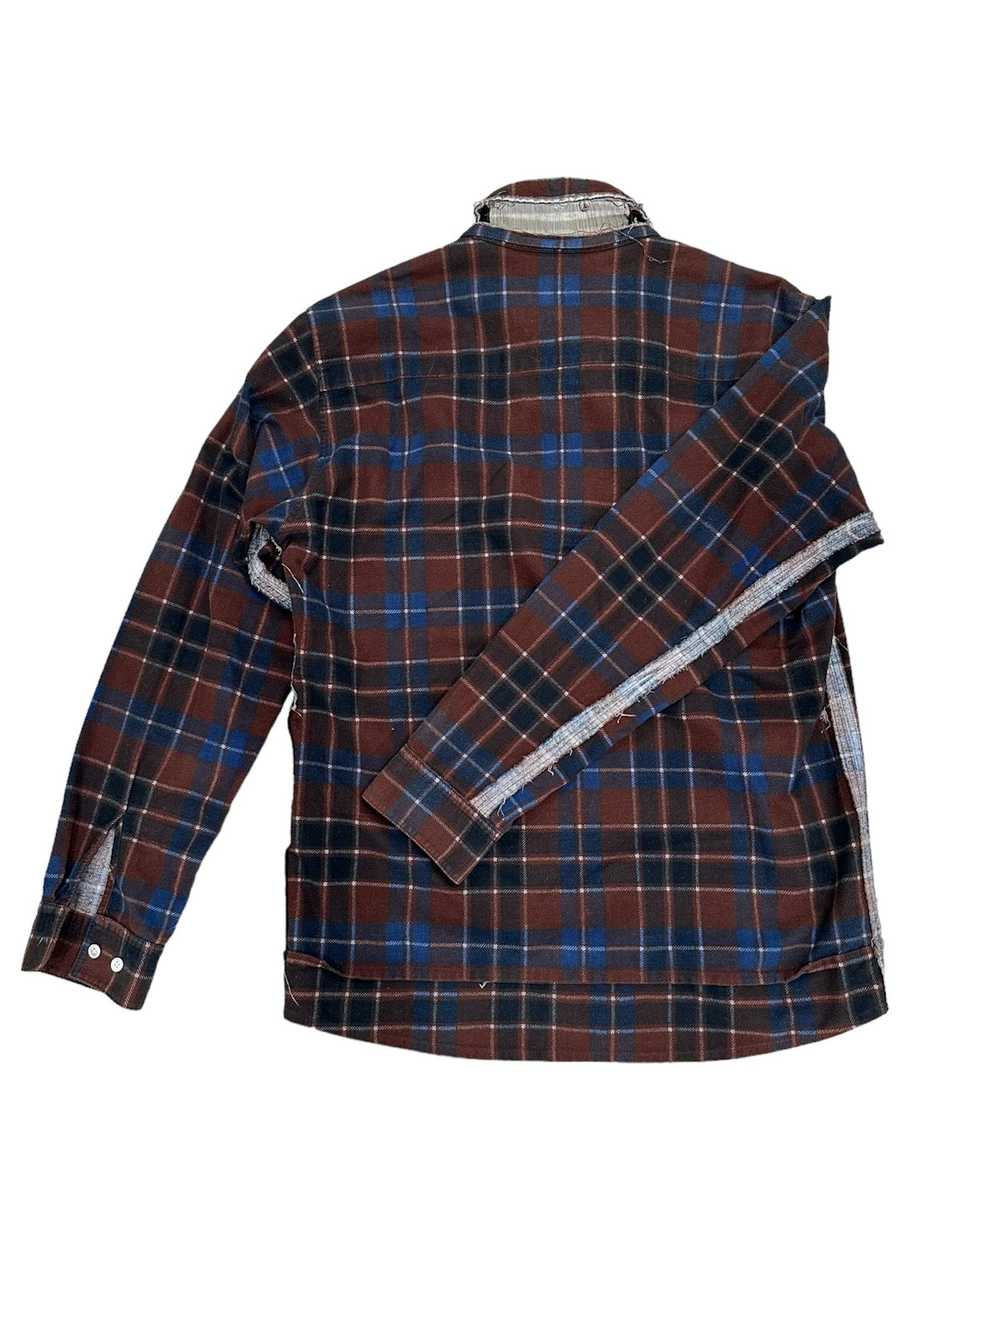 Undercover Undercover Scab Flannel - image 4